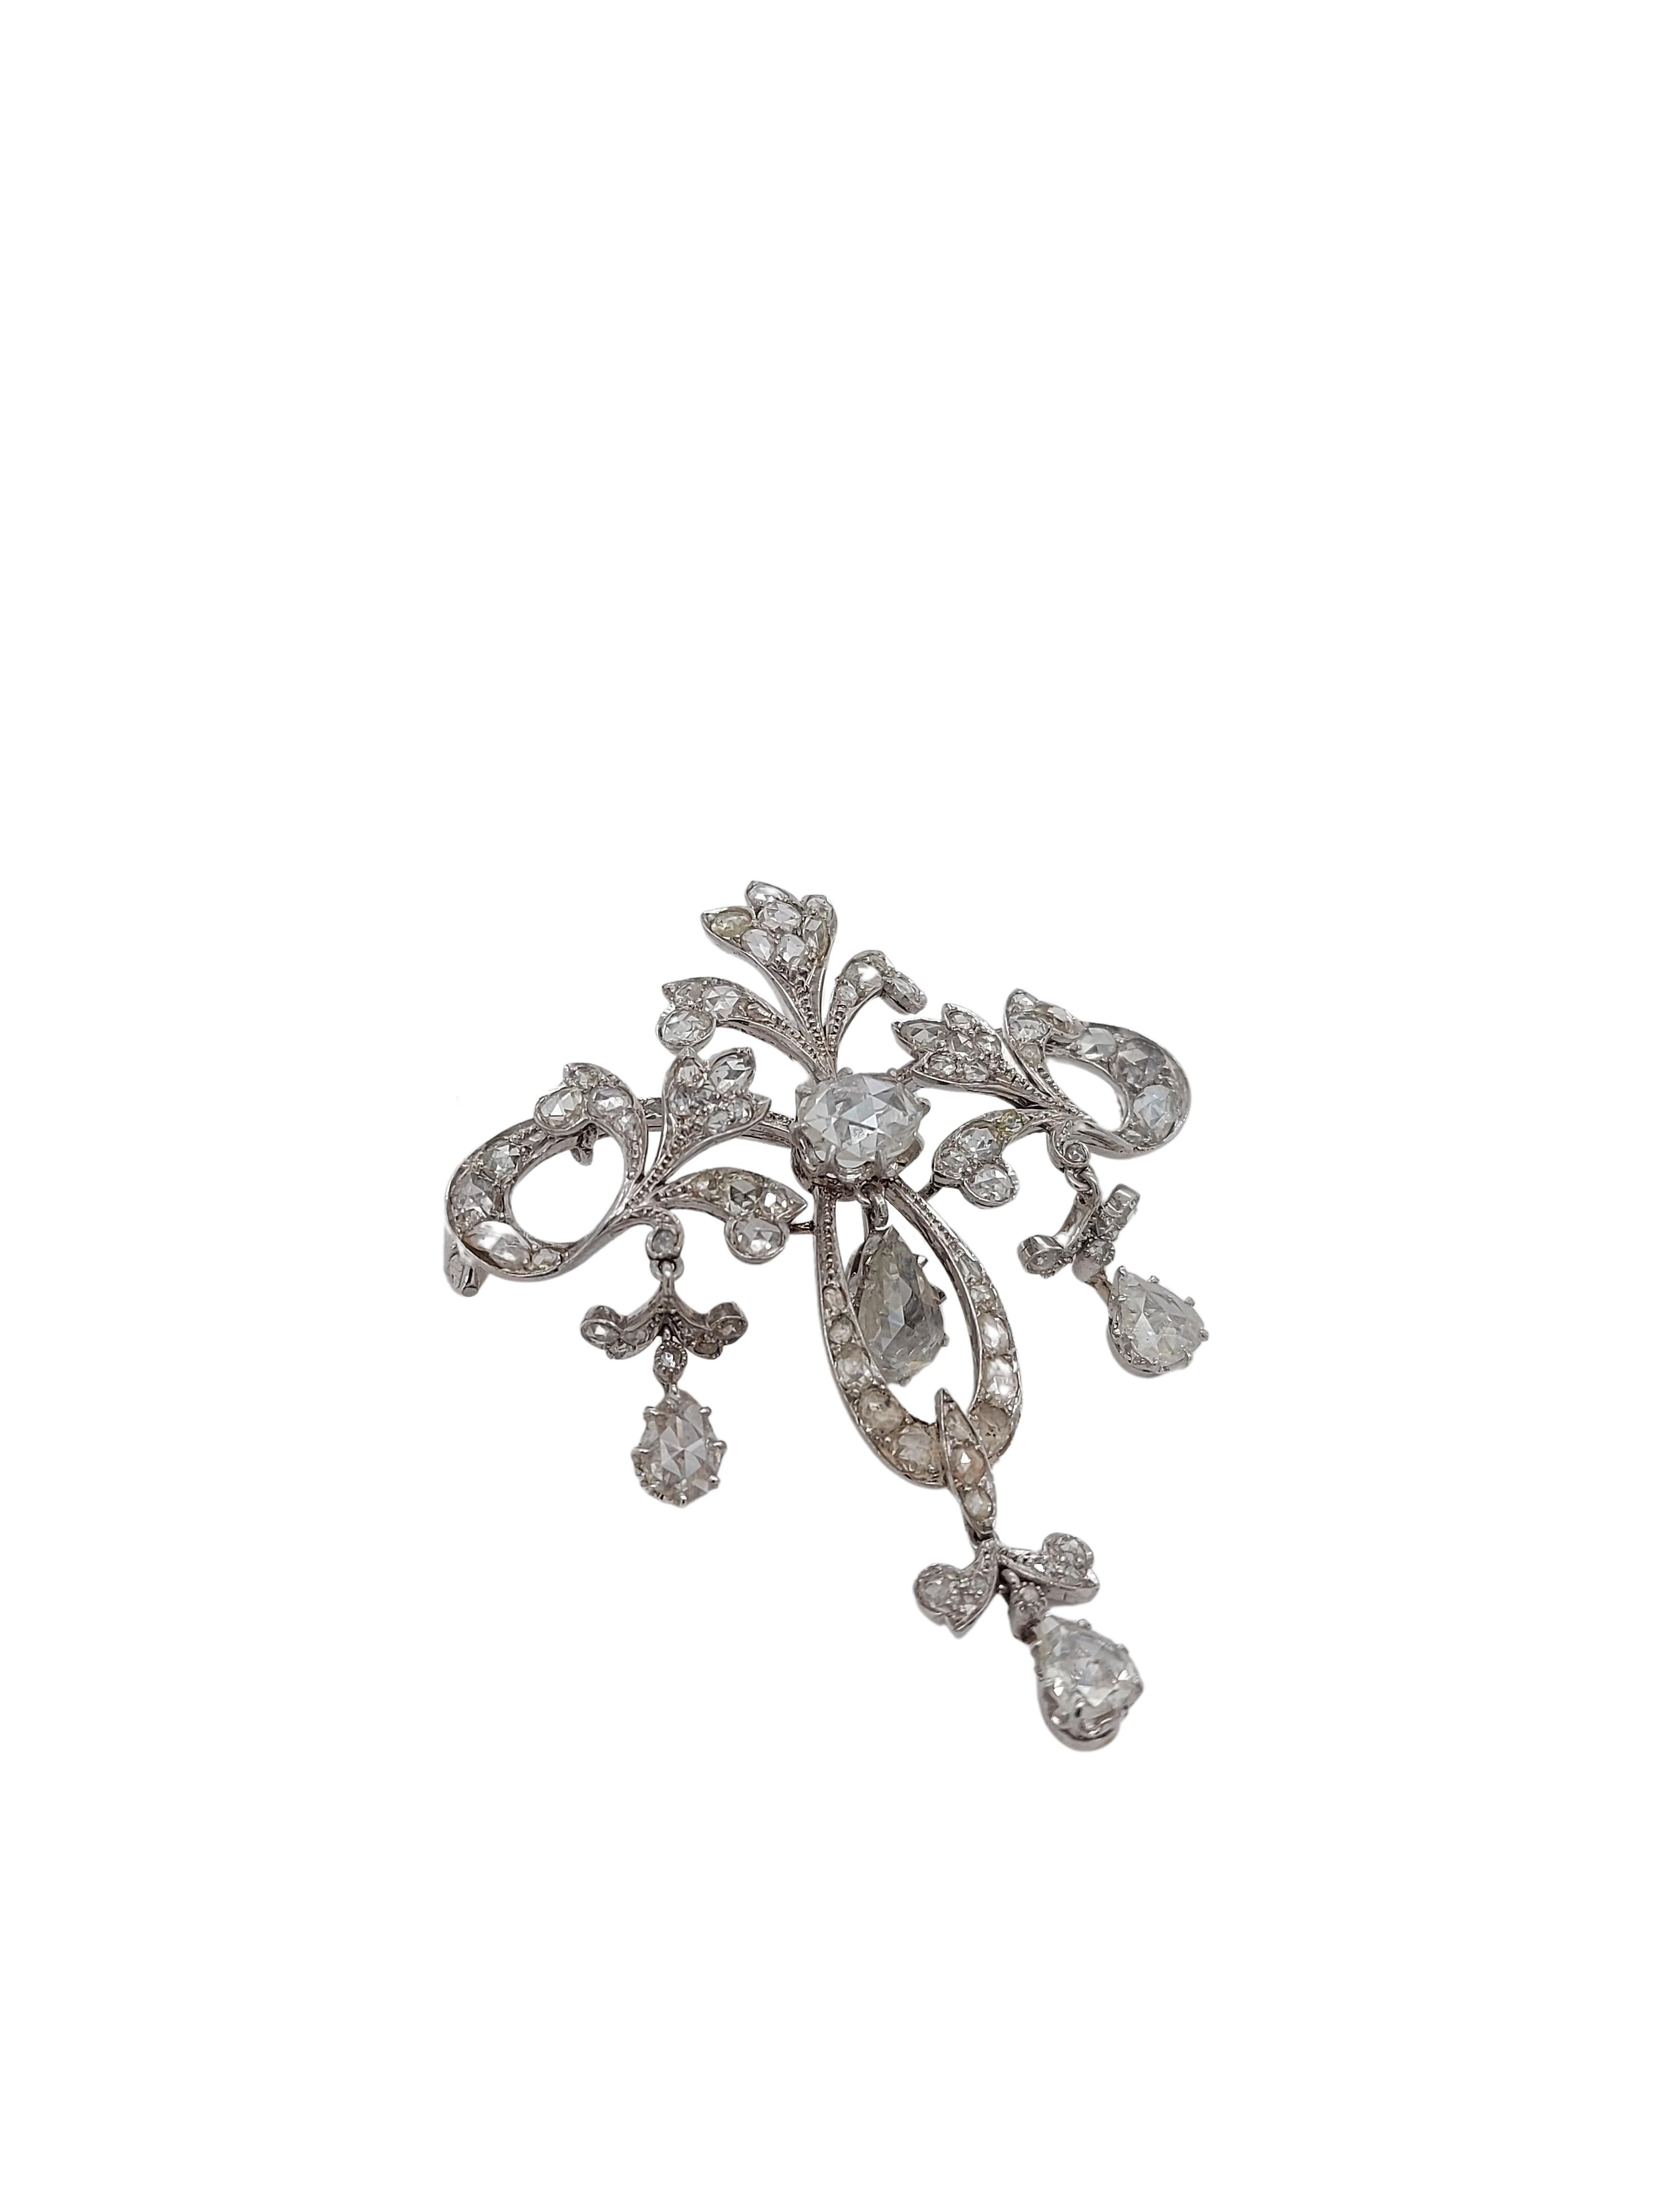 Platinum Brooch / Necklace with Rose Cut Diamonds For Sale 5